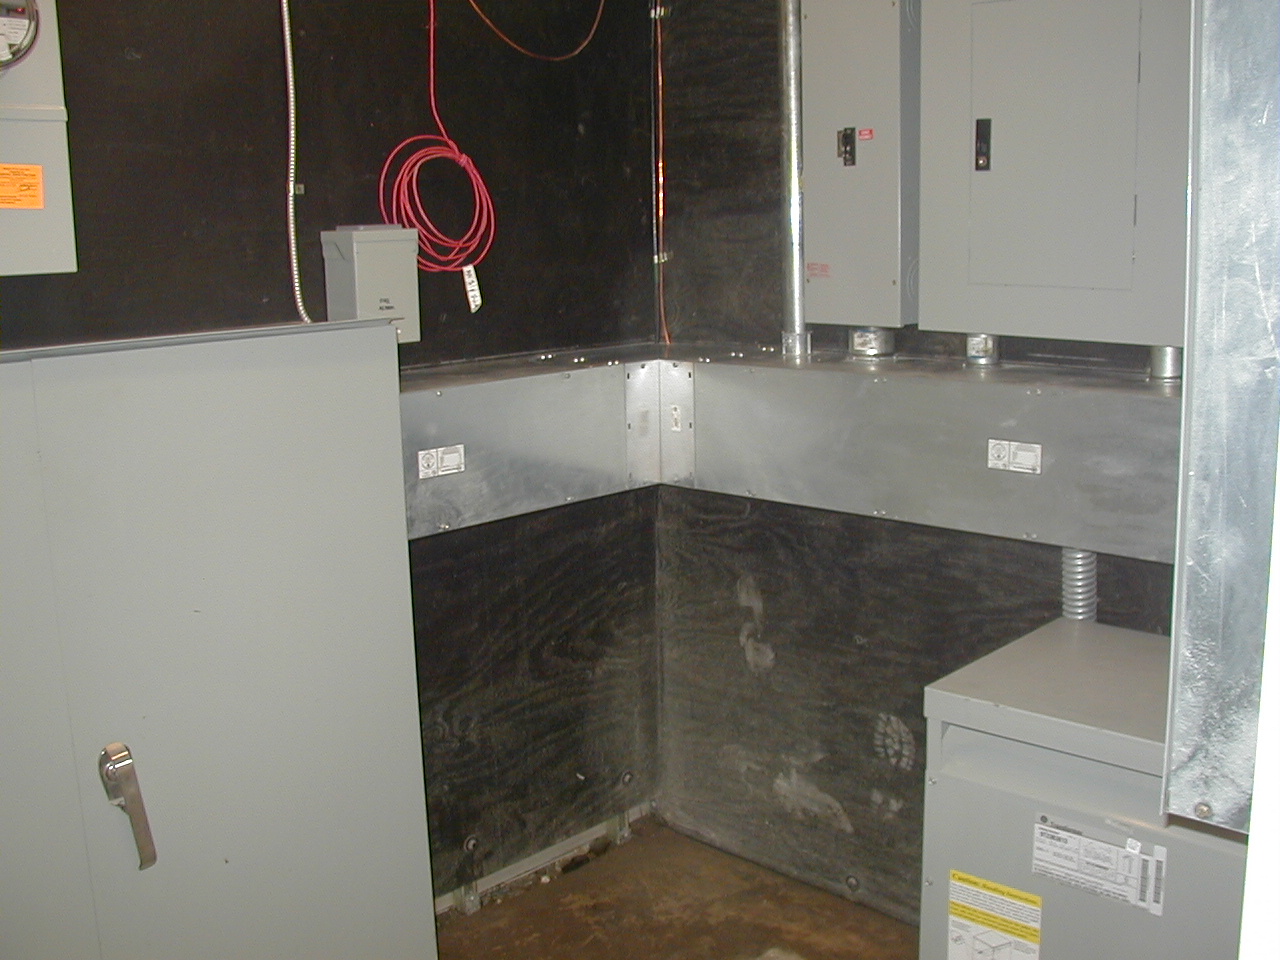 View of recently installed electrical room

400 Amp 120/240 Volt Three Phase Delta CT Cabinet
120/240 Volt Delta Power Panel
120/208 Volt Wye Lighting Panel
Power and Fire Alarm Disconnects
120/240 to 120/208 Volt Delta/Wye [Y] Transformer

      Click to return to photo page!